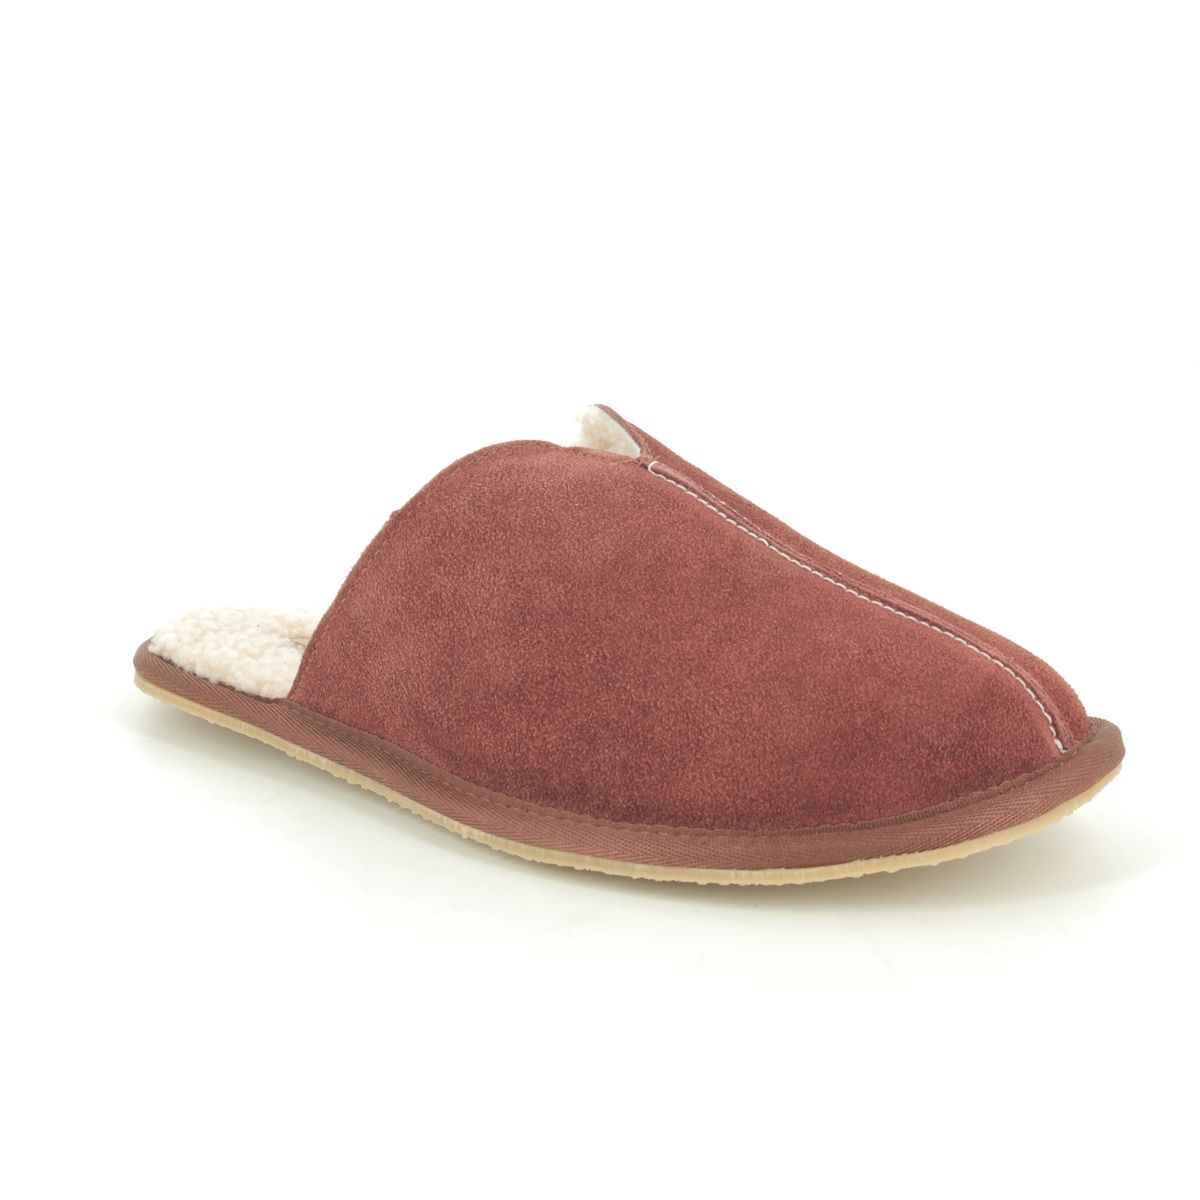 clarks discount slippers